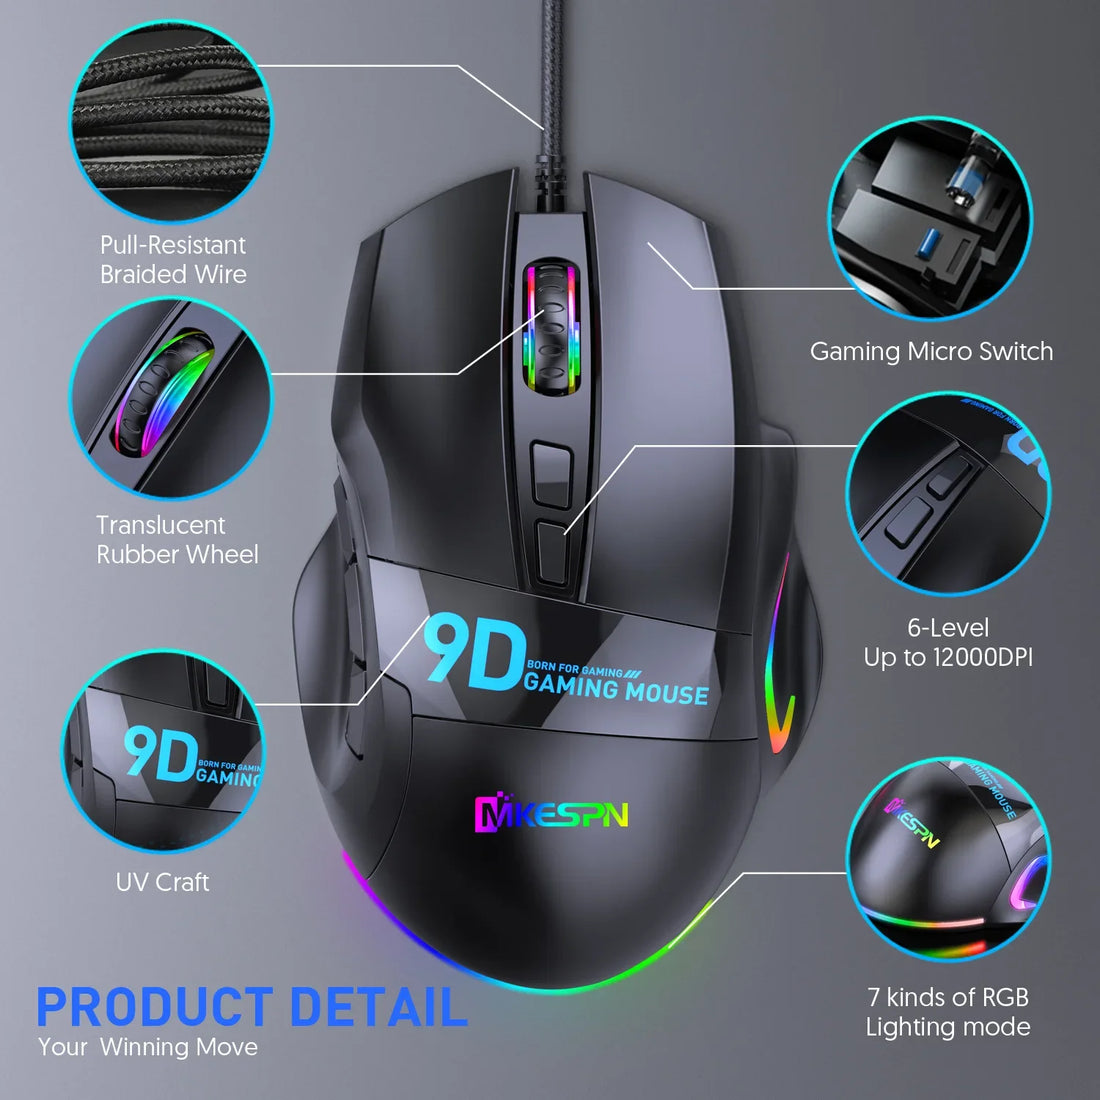 Professional 12000 DPI Gaming Mouse 9 Buttons LED Optical USB Wired Mice For Pro PC Gamer Computer Laptop Ergonomics Magic Mouse